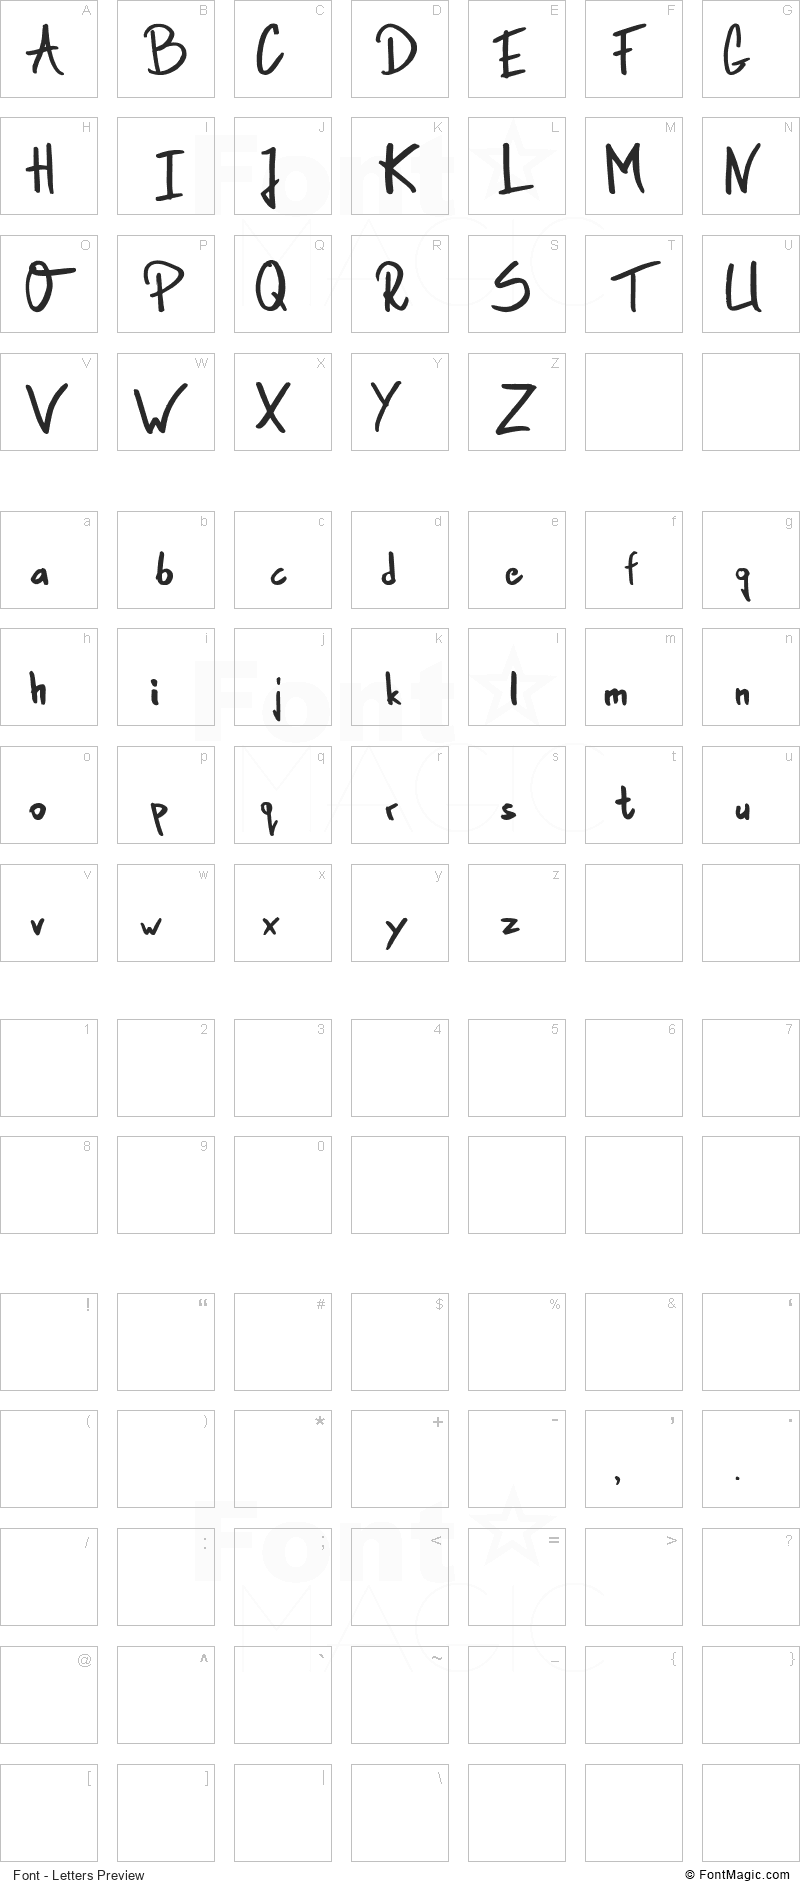 Gambler in Town Font - All Latters Preview Chart